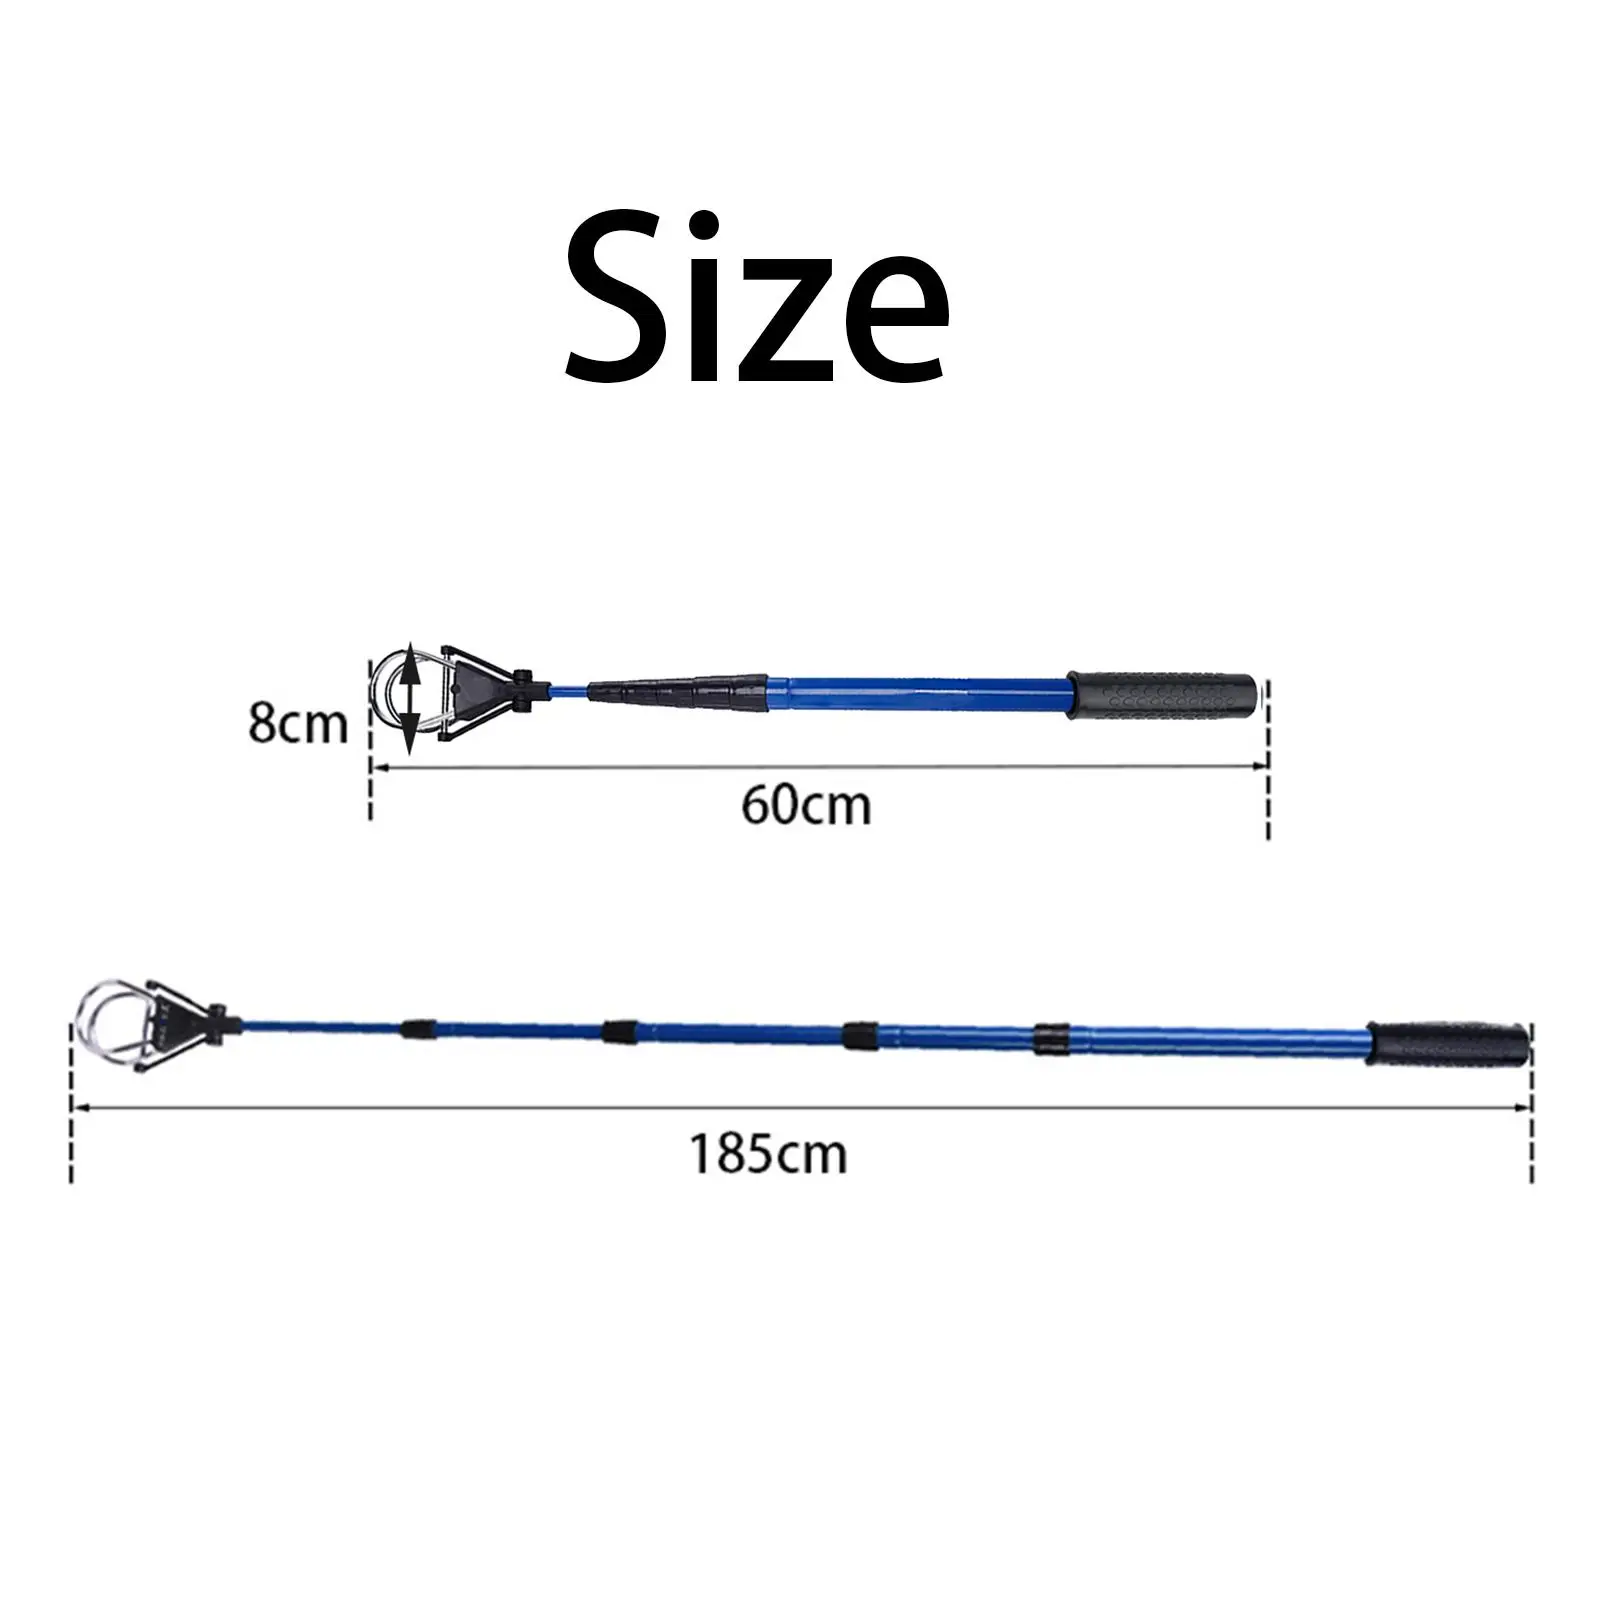 Long Golf Ball Retriever Automatic Locking Shaft Tool Locking Golf Picker Retractable for Water Outdoor Men Sports